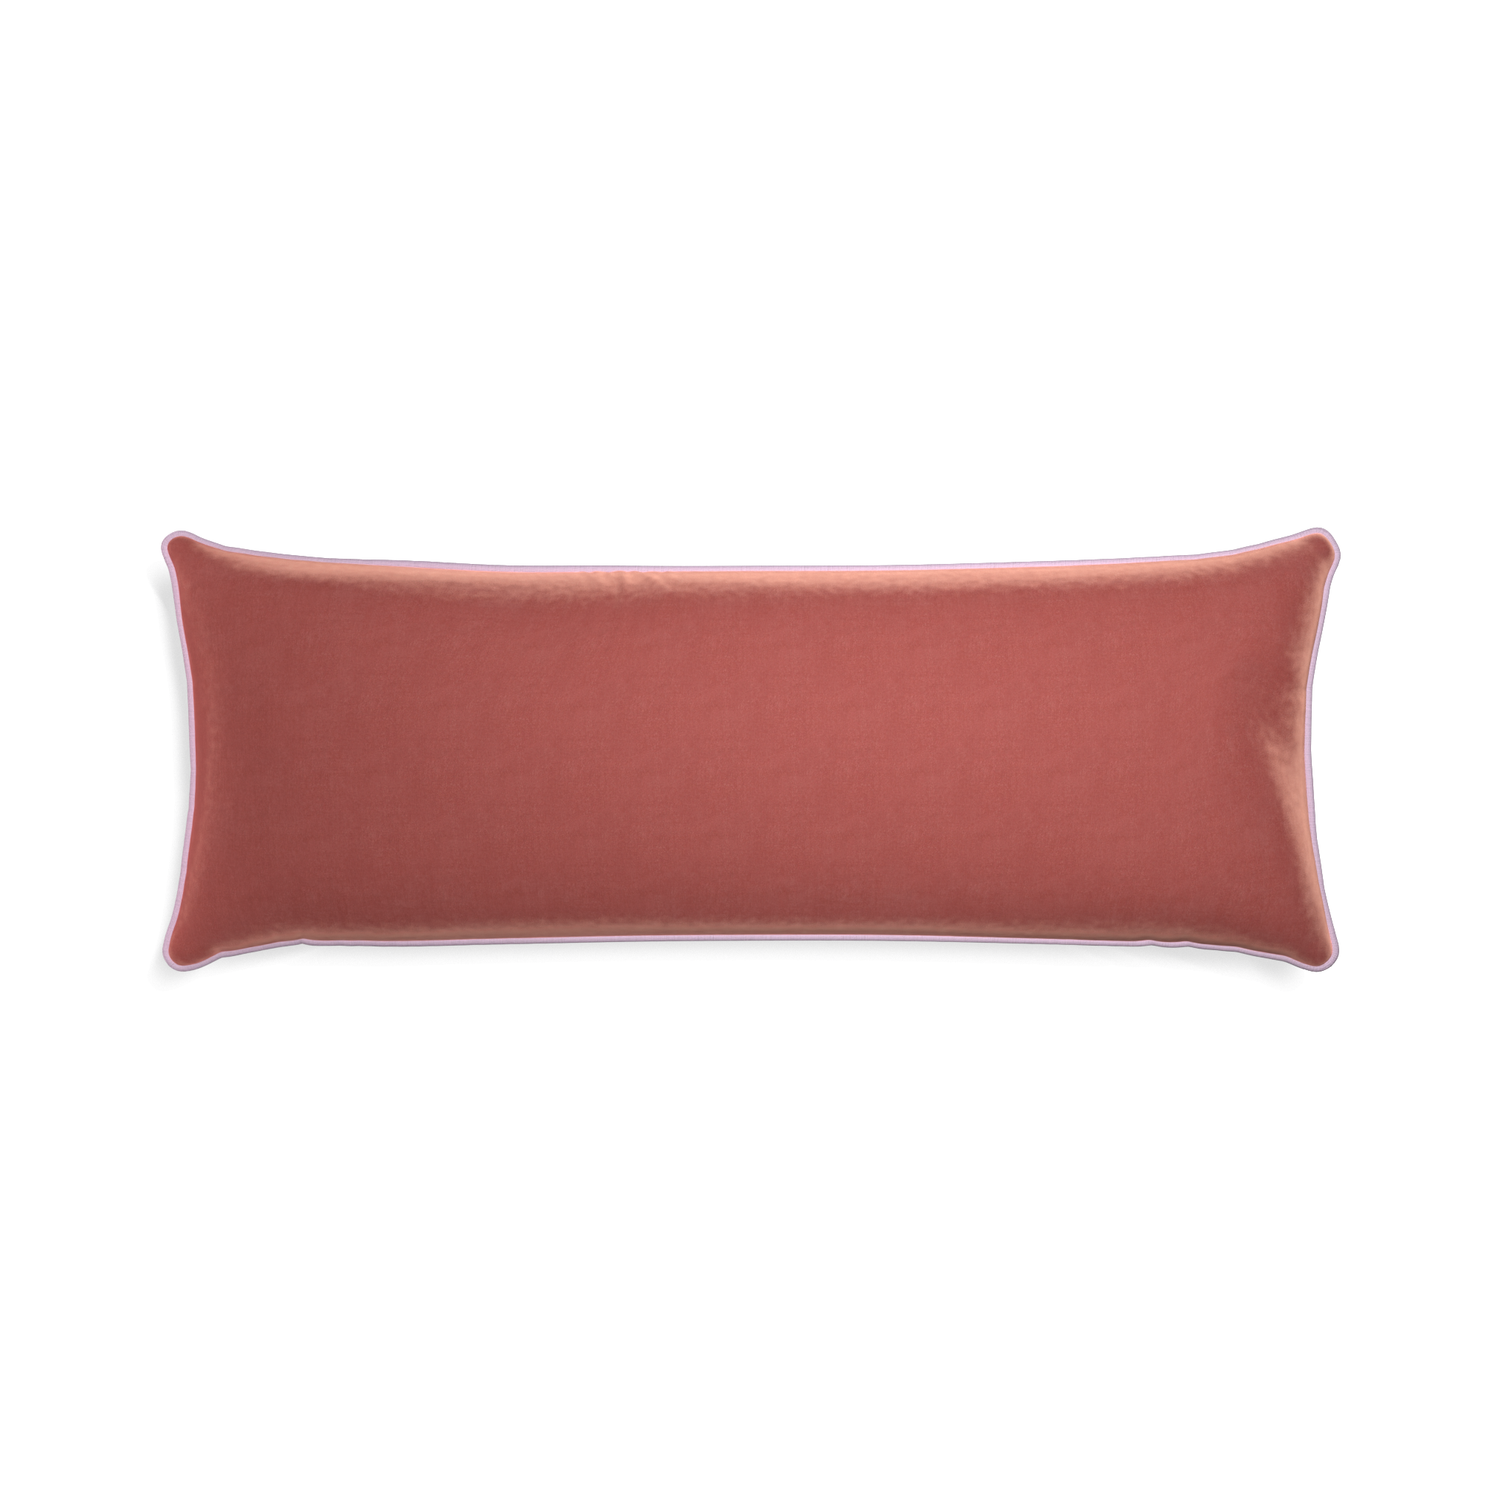 Xl-lumbar cosmo velvet custom pillow with l piping on white background